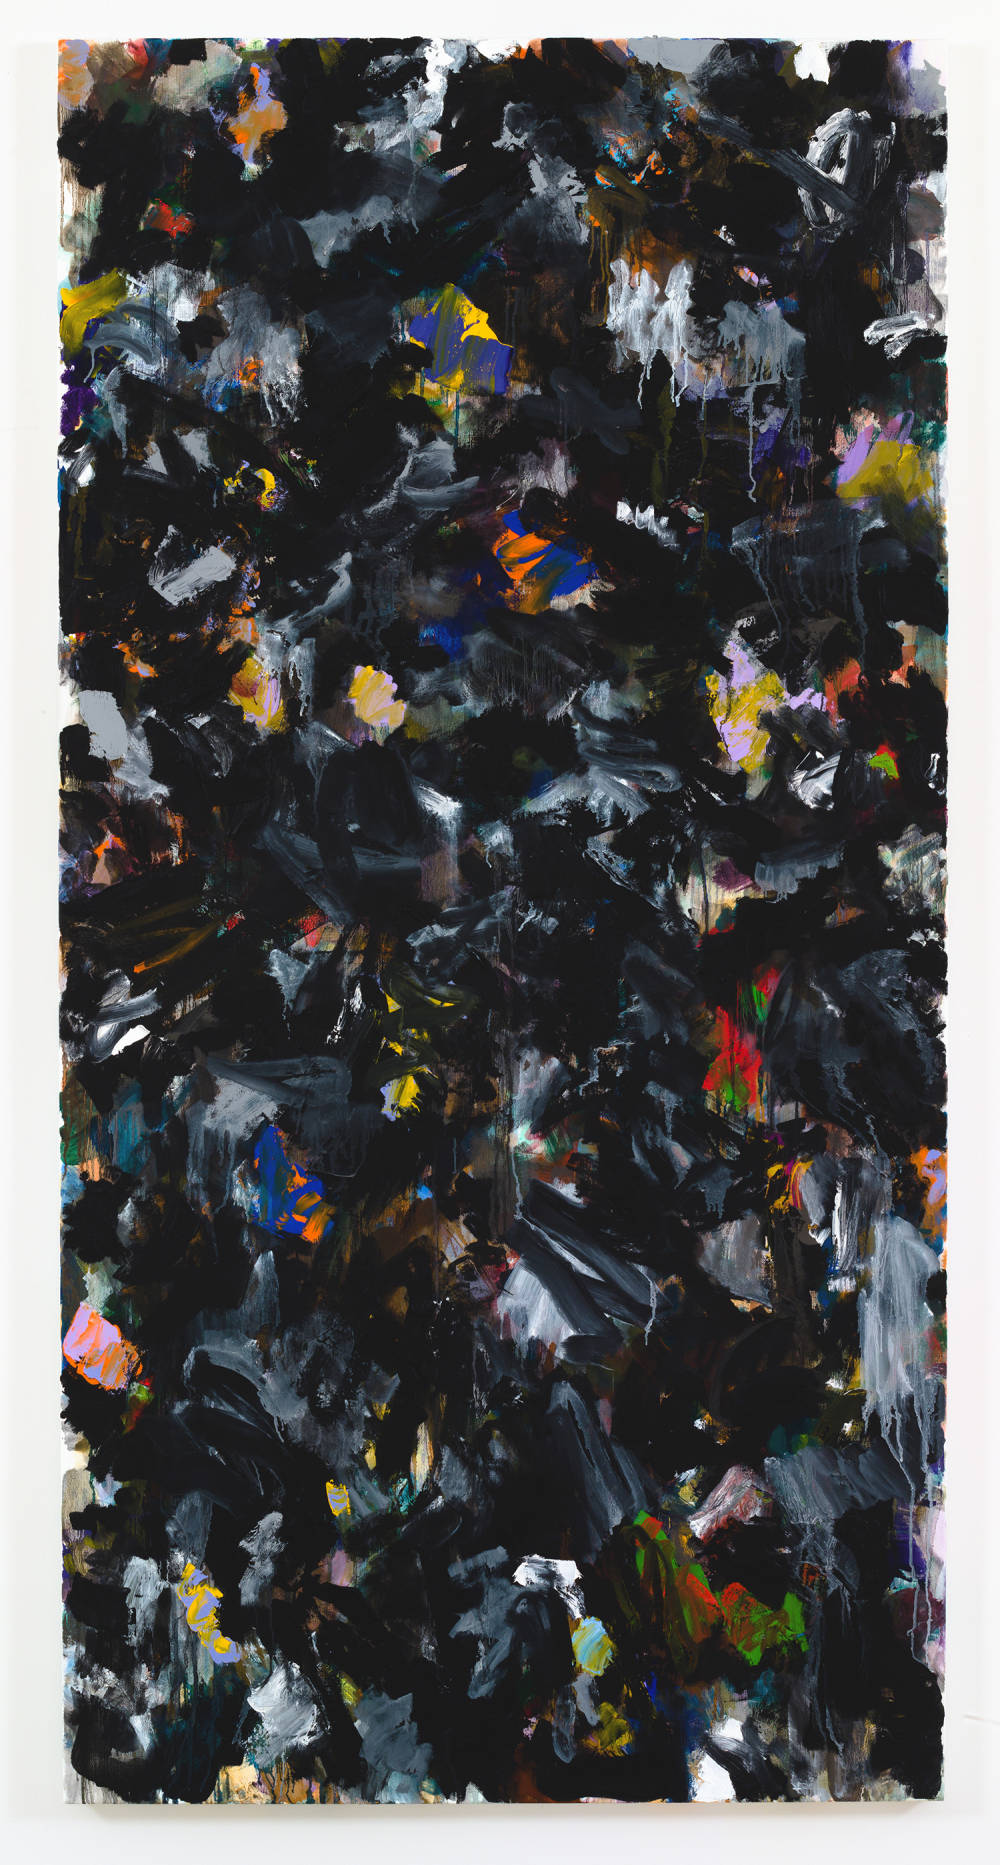 A large abstract painting with numerous swatches of color on top of one another. The dominant color is black. The paint is applied in thin layers and in some areas is dripping.